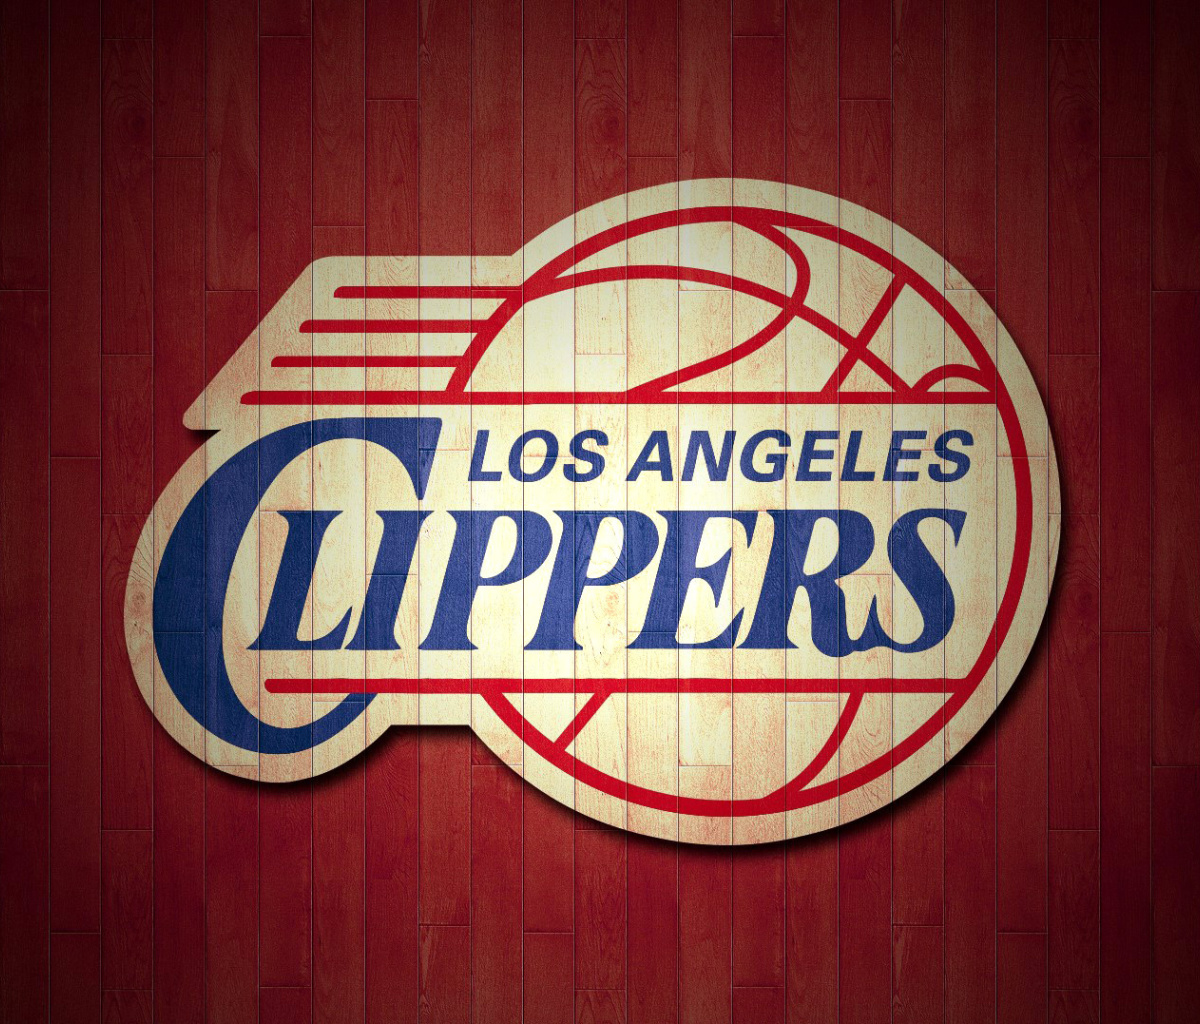 Los Angeles Clippers Logo wallpaper 1200x1024